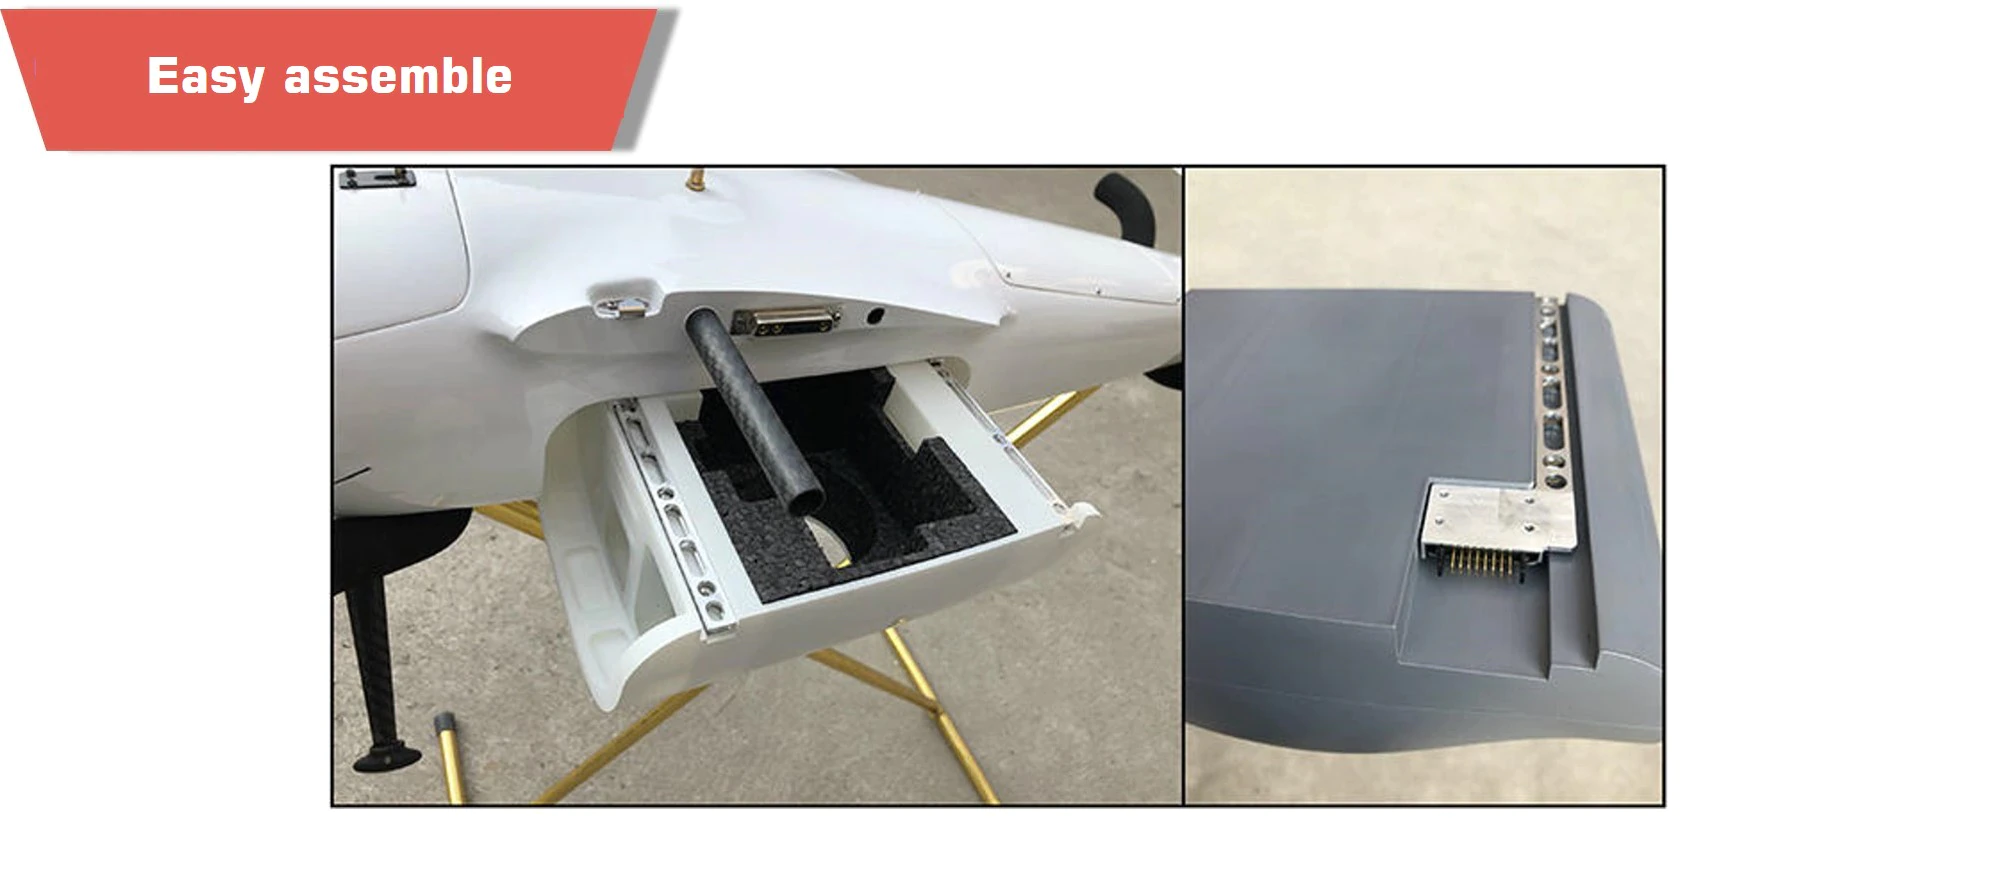 G7 vtol fixed wing uav drone for survey and rescue with power set version p1 motinew